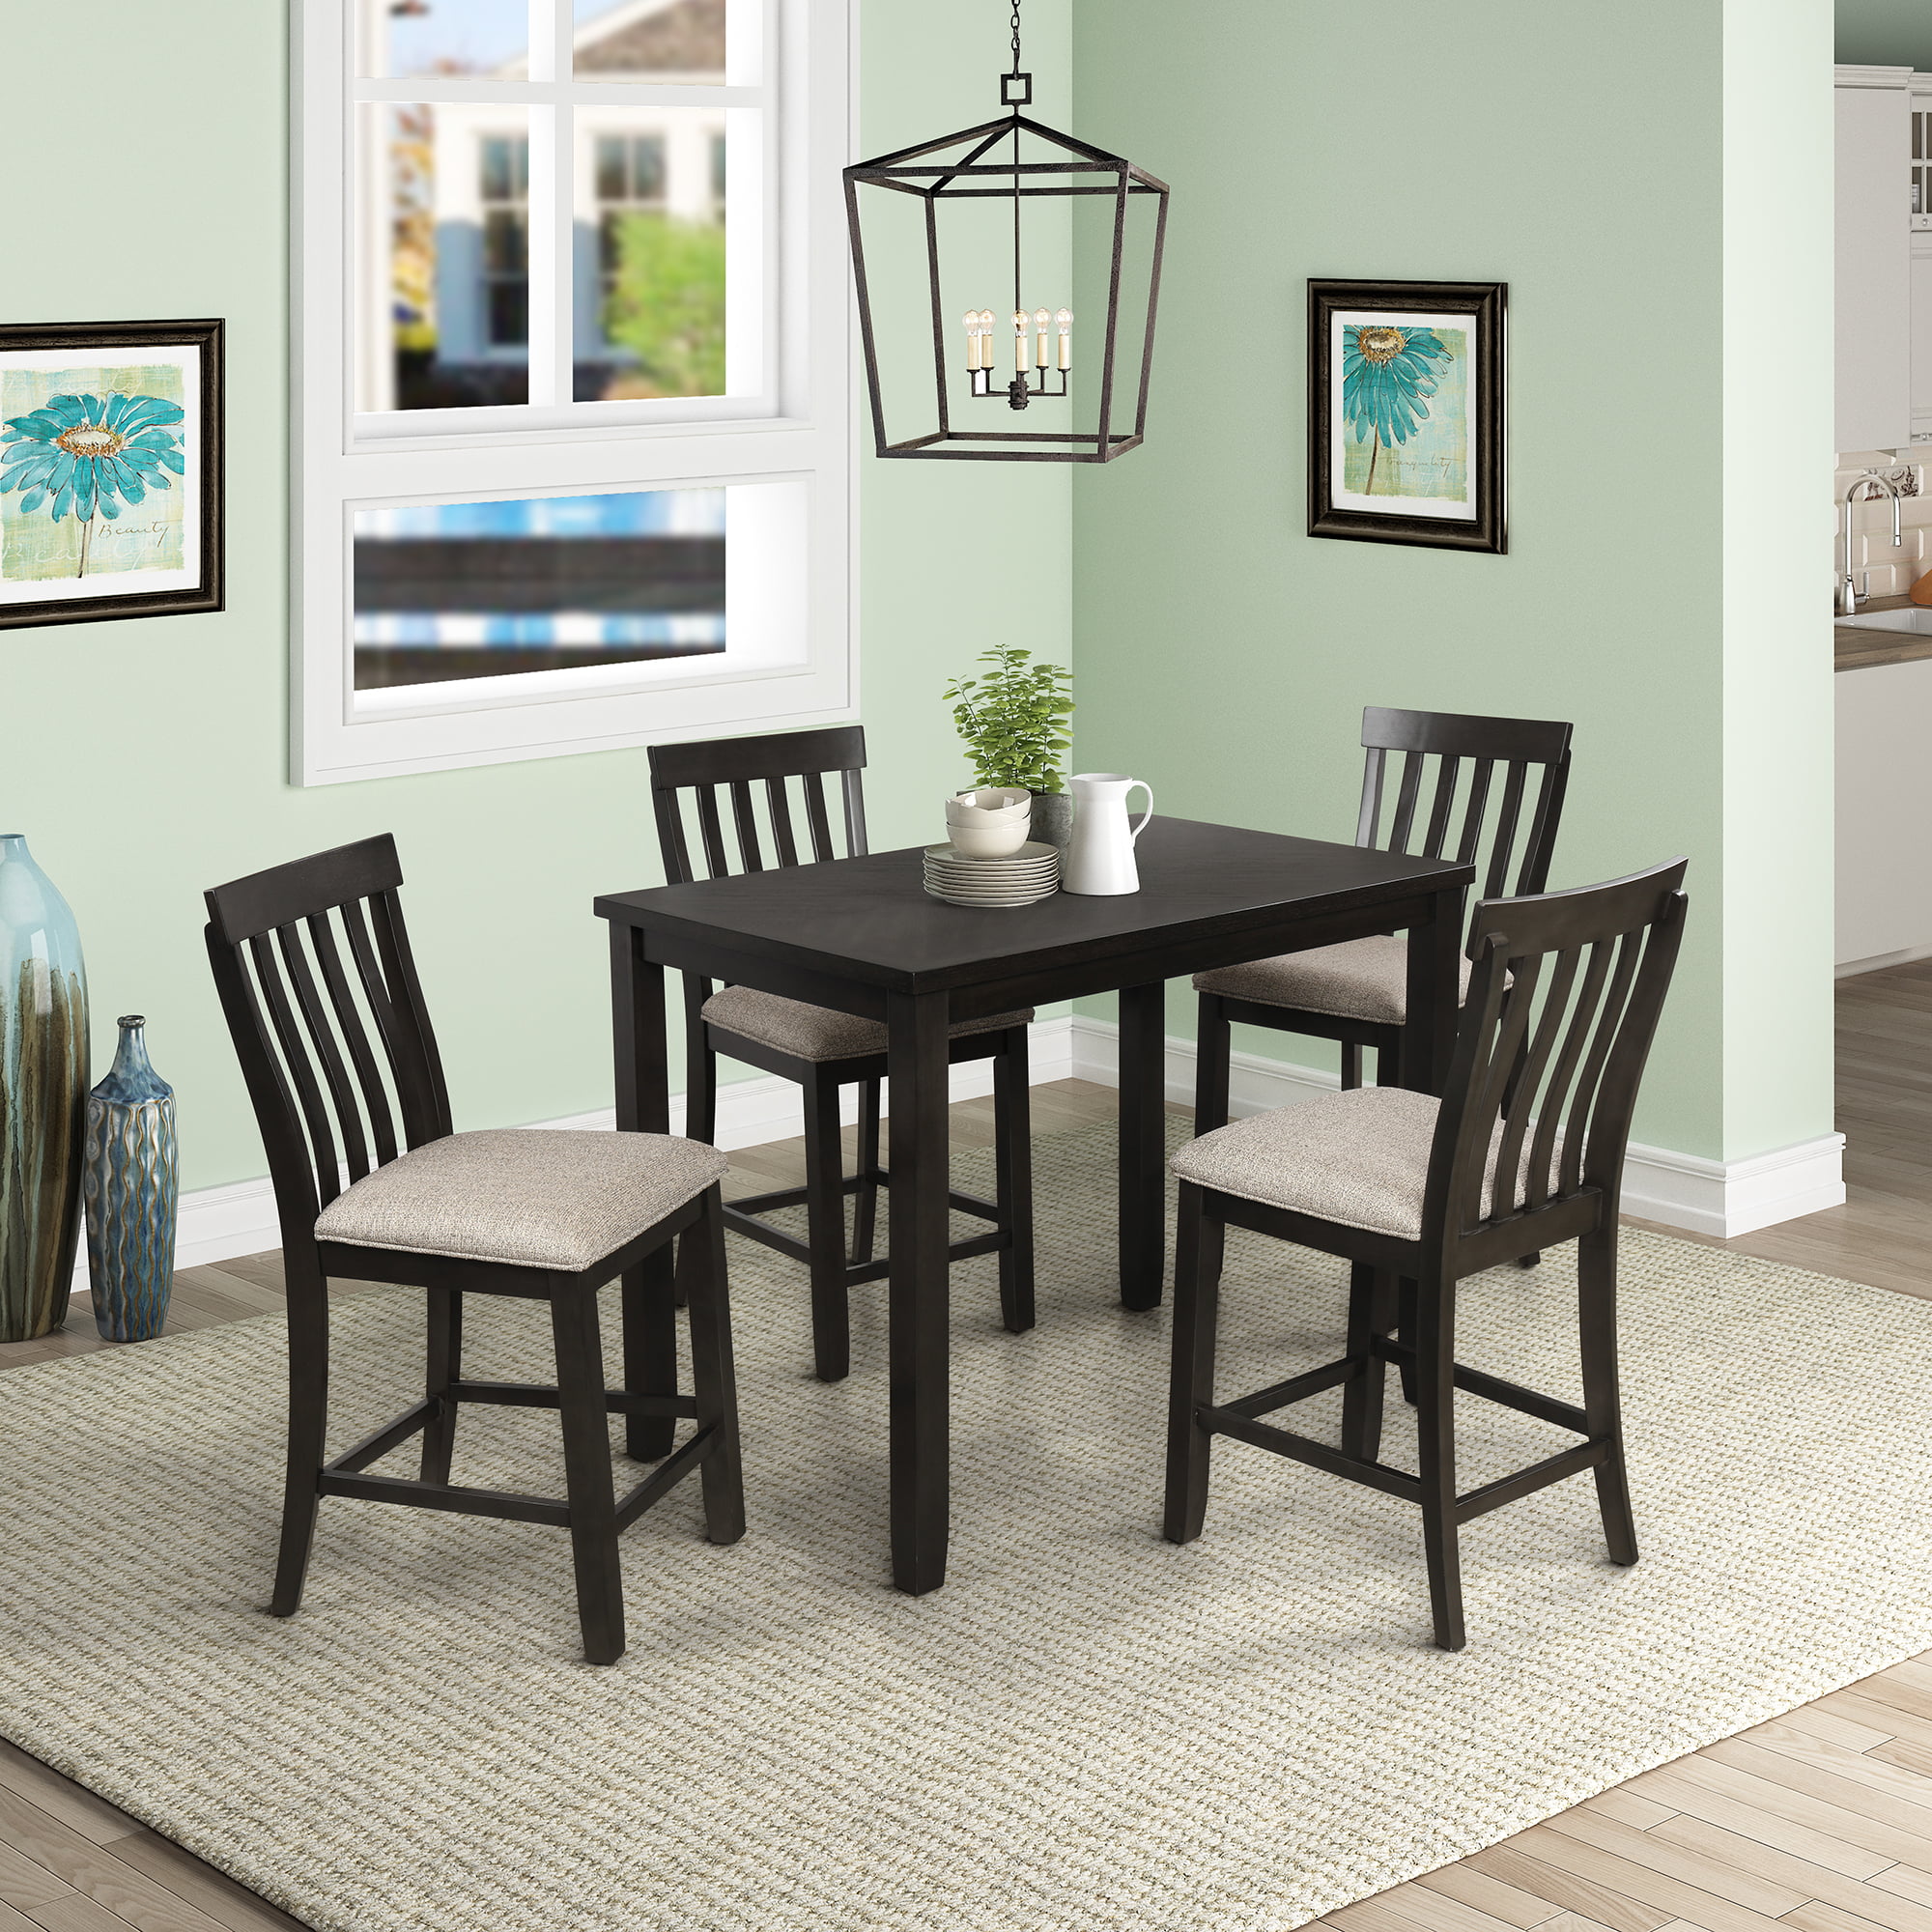 Modern Clearance Dining Room Furniture for Small Space